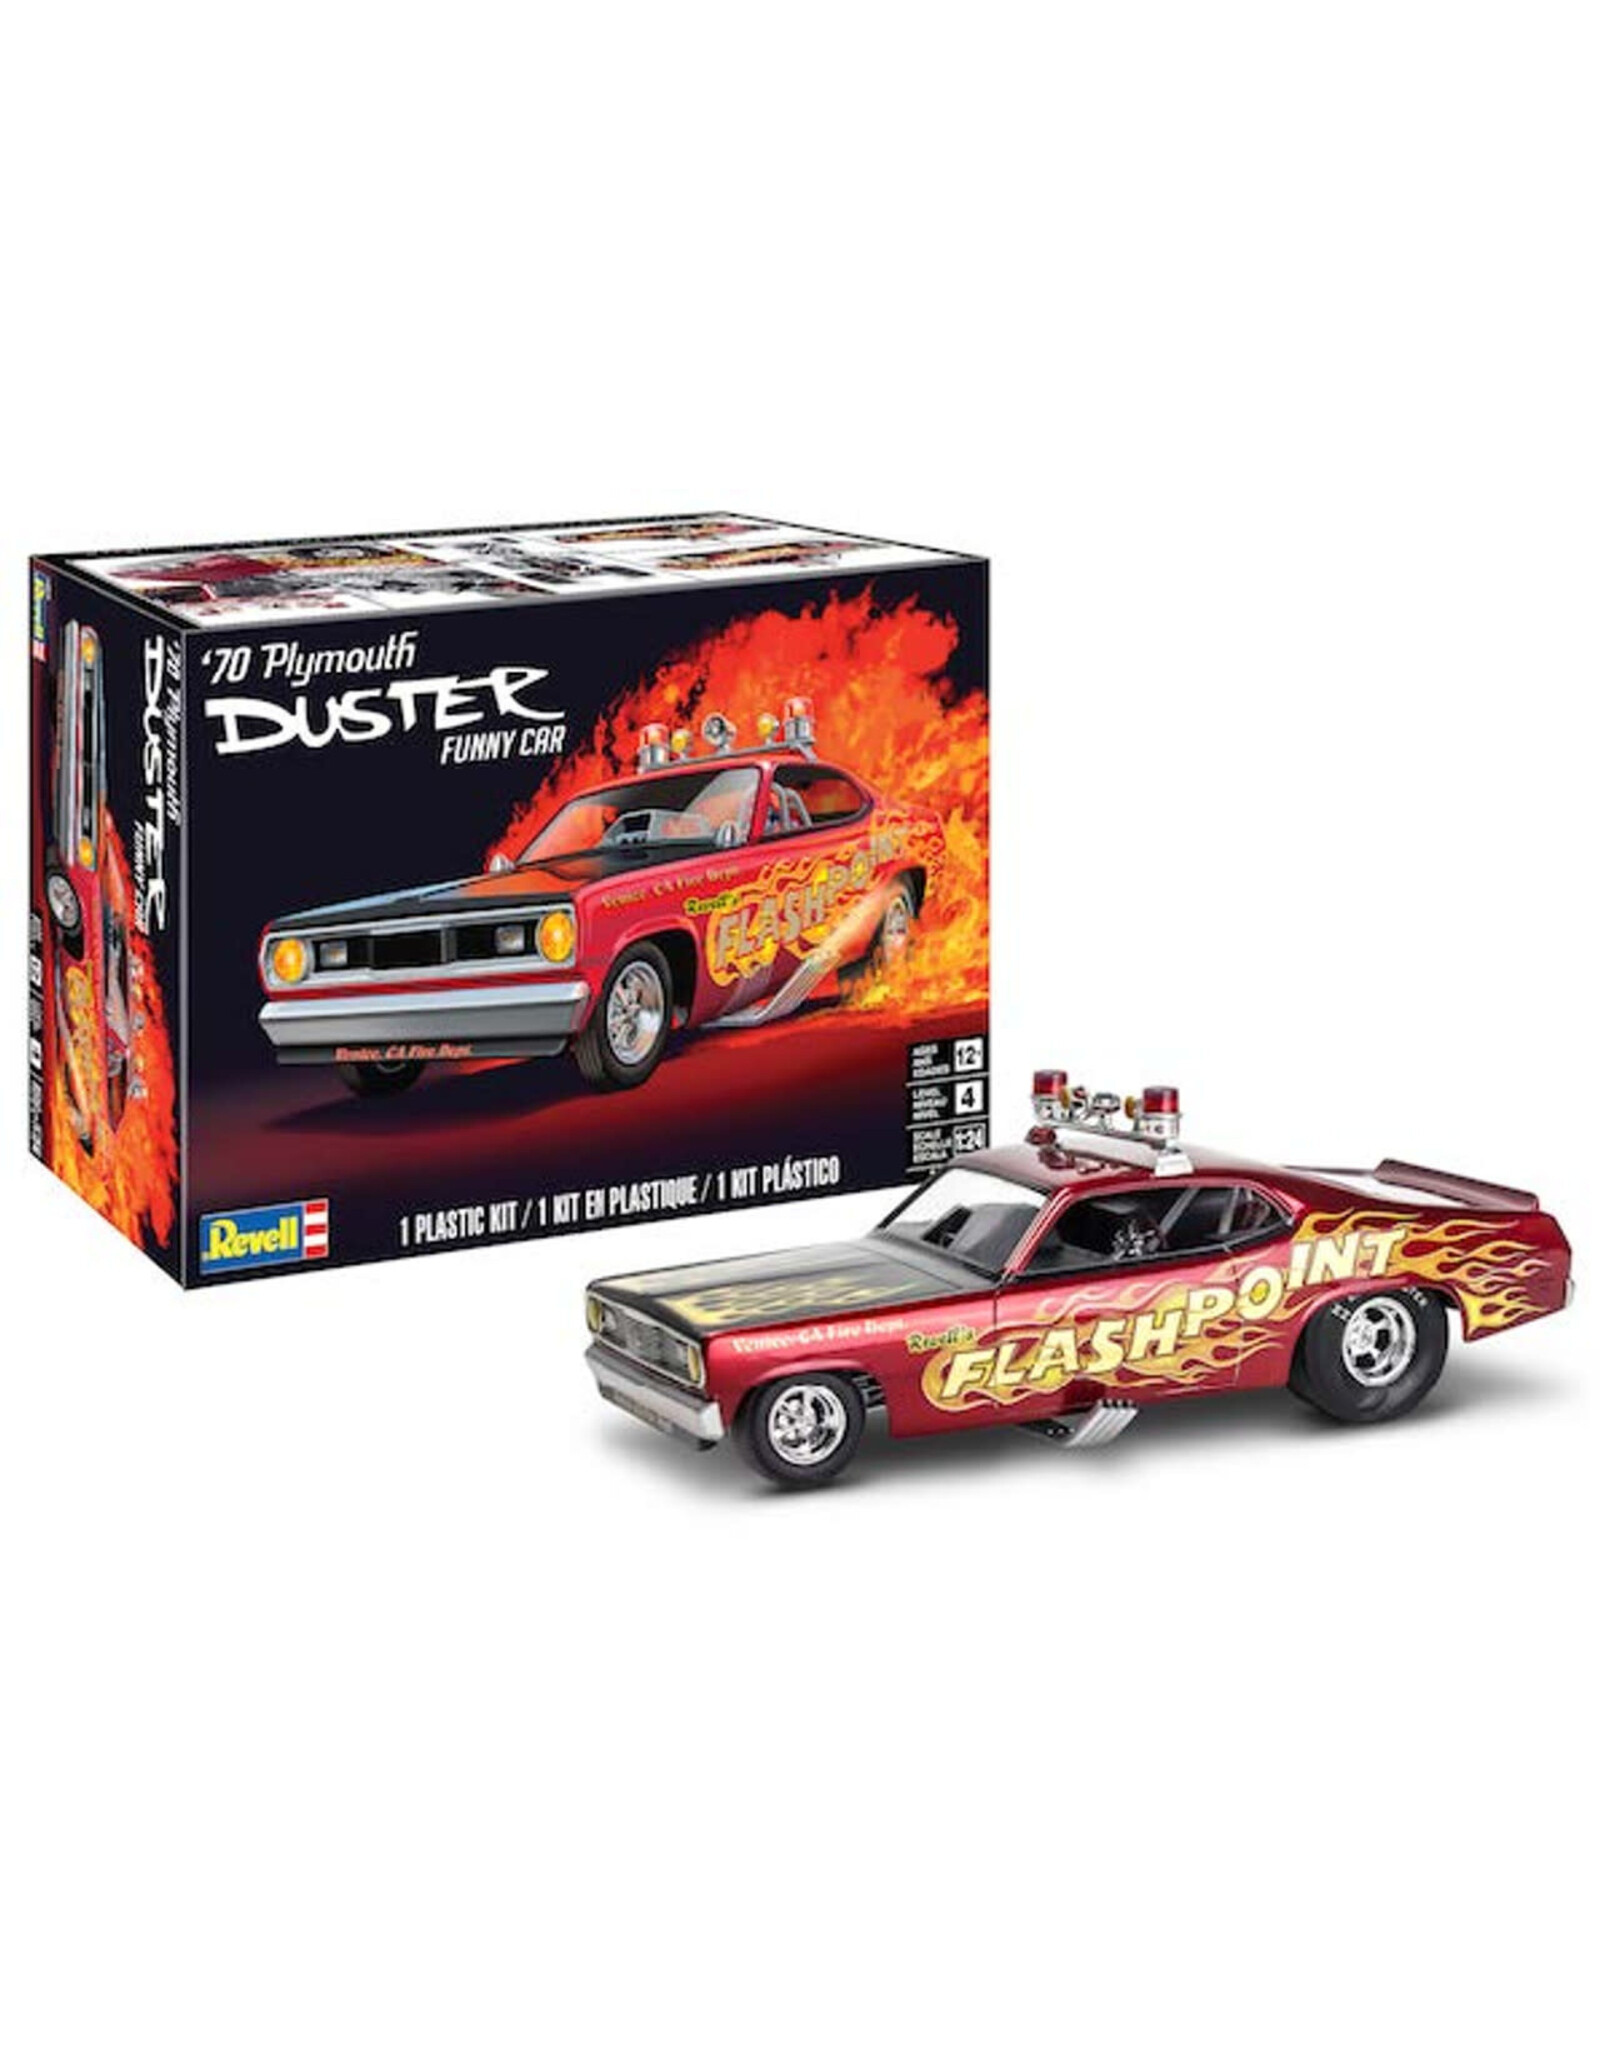 Revell 1/24 70 Plymouth Duster Funny Car